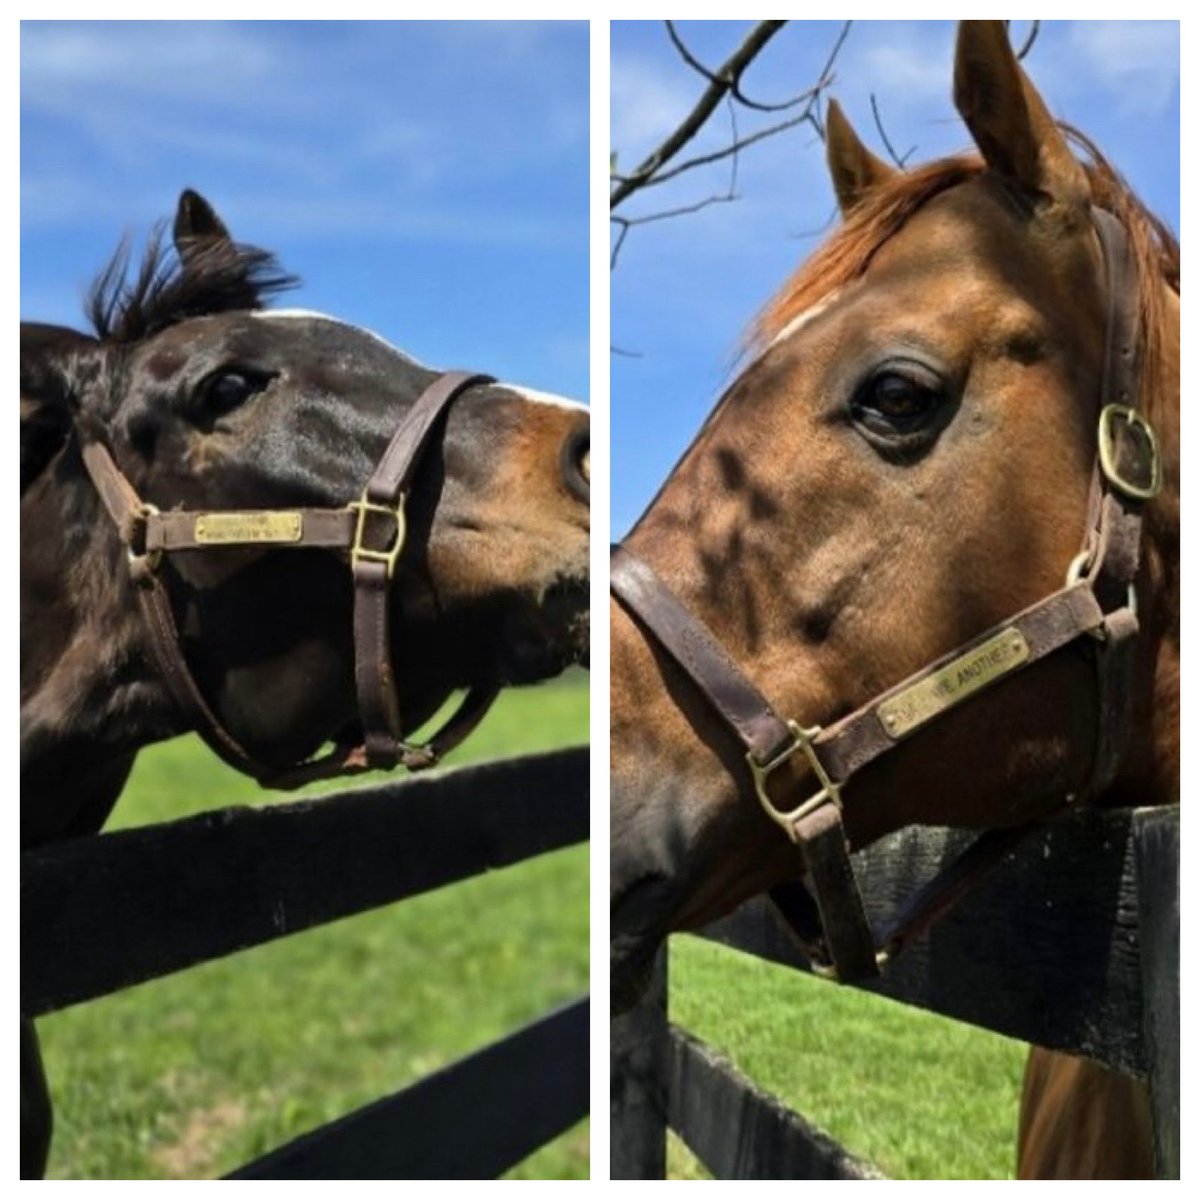 Do they remember? In the 2012 #Kentucky Derby, I’LL HAVE ANOTHER was taken to the post by LAVA MAN. Twelve years later, they are neighbors at Old Friends. What do you think? Do they remember? Mary Greene Photos